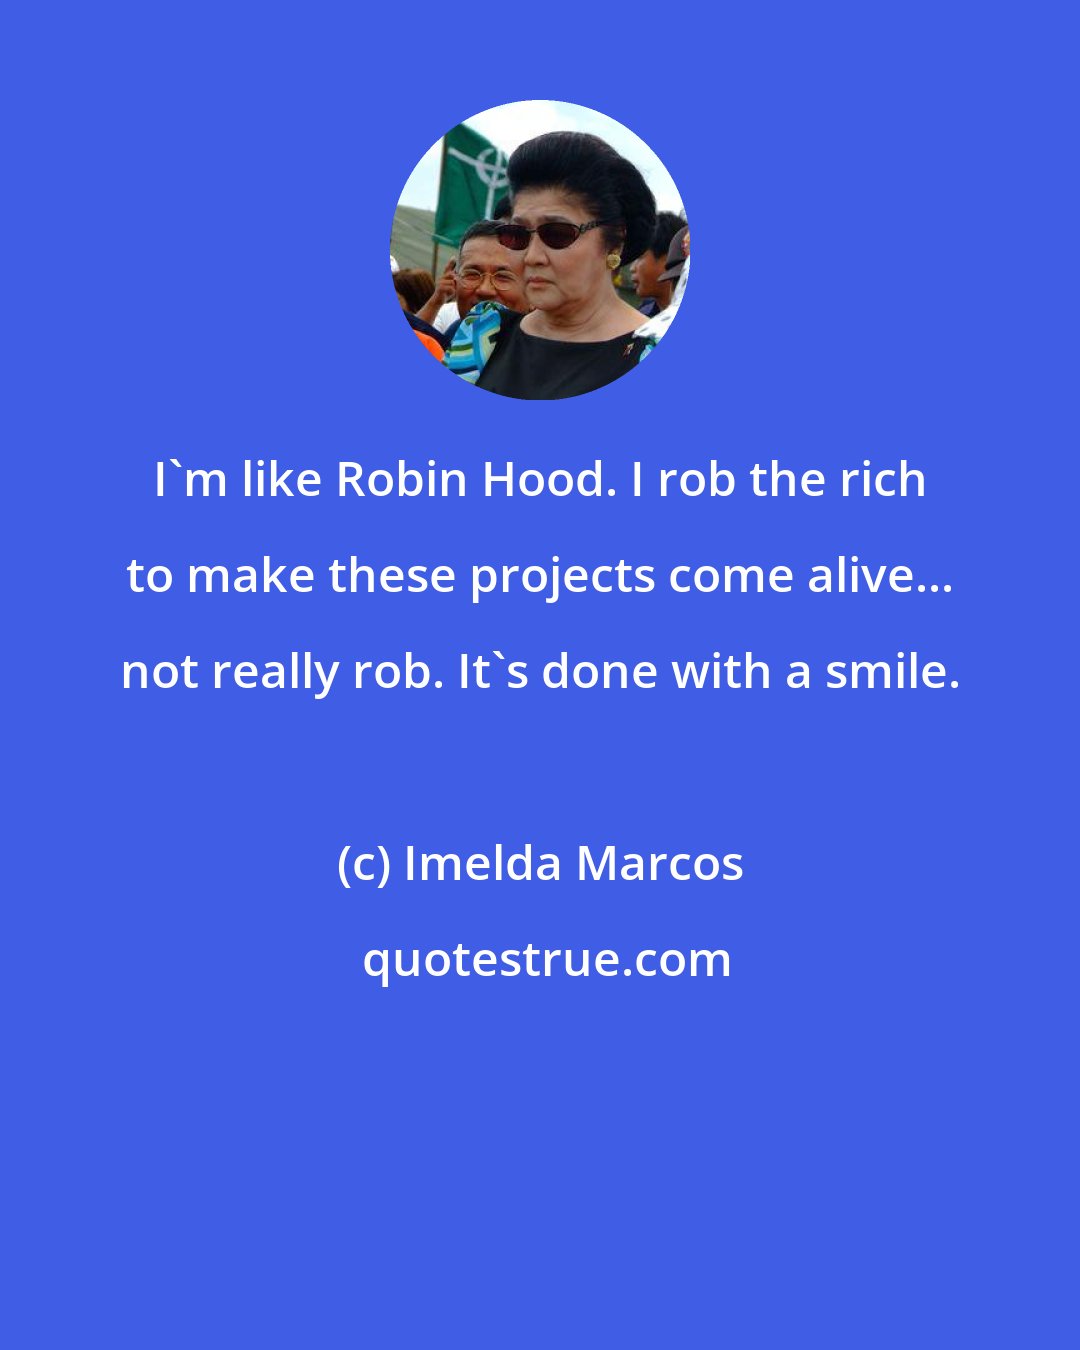 Imelda Marcos: I'm like Robin Hood. I rob the rich to make these projects come alive... not really rob. It's done with a smile.